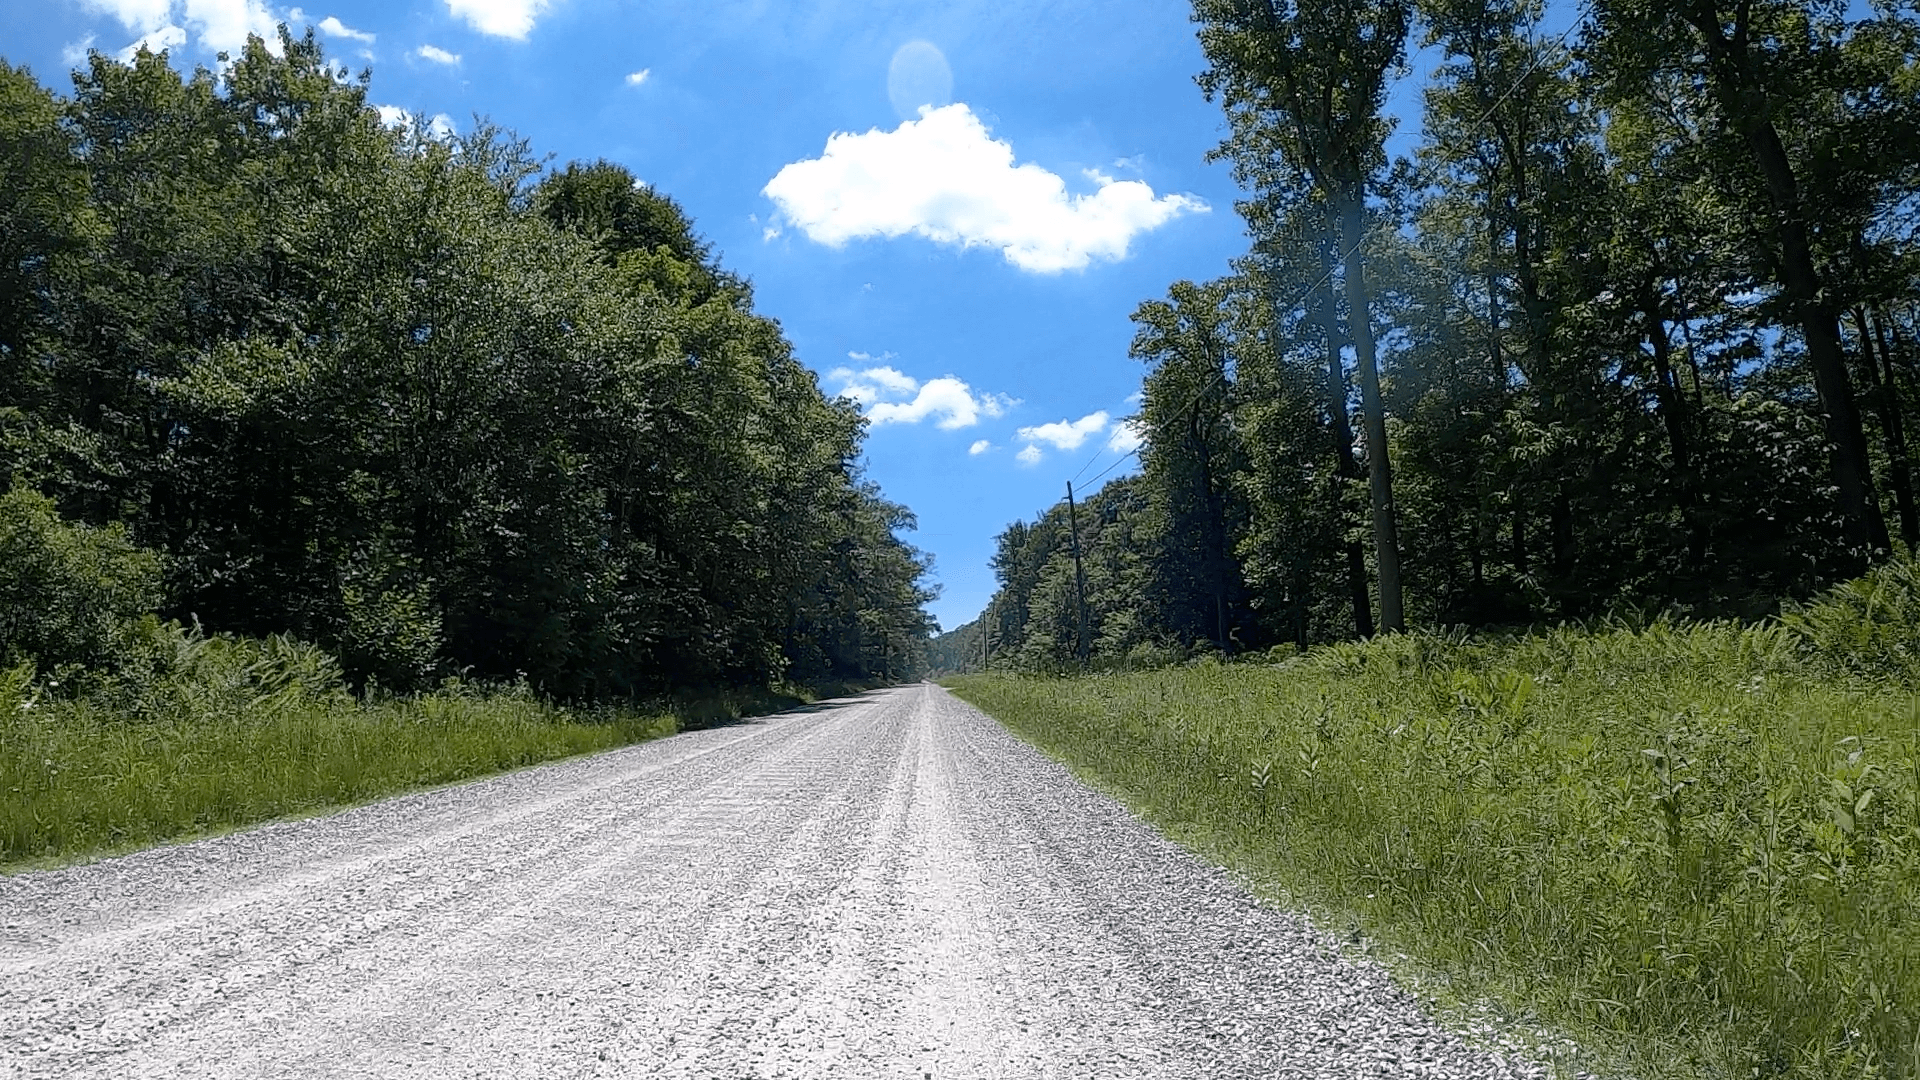 Laurel Highlands Gravel Routes Collection - Summit Road